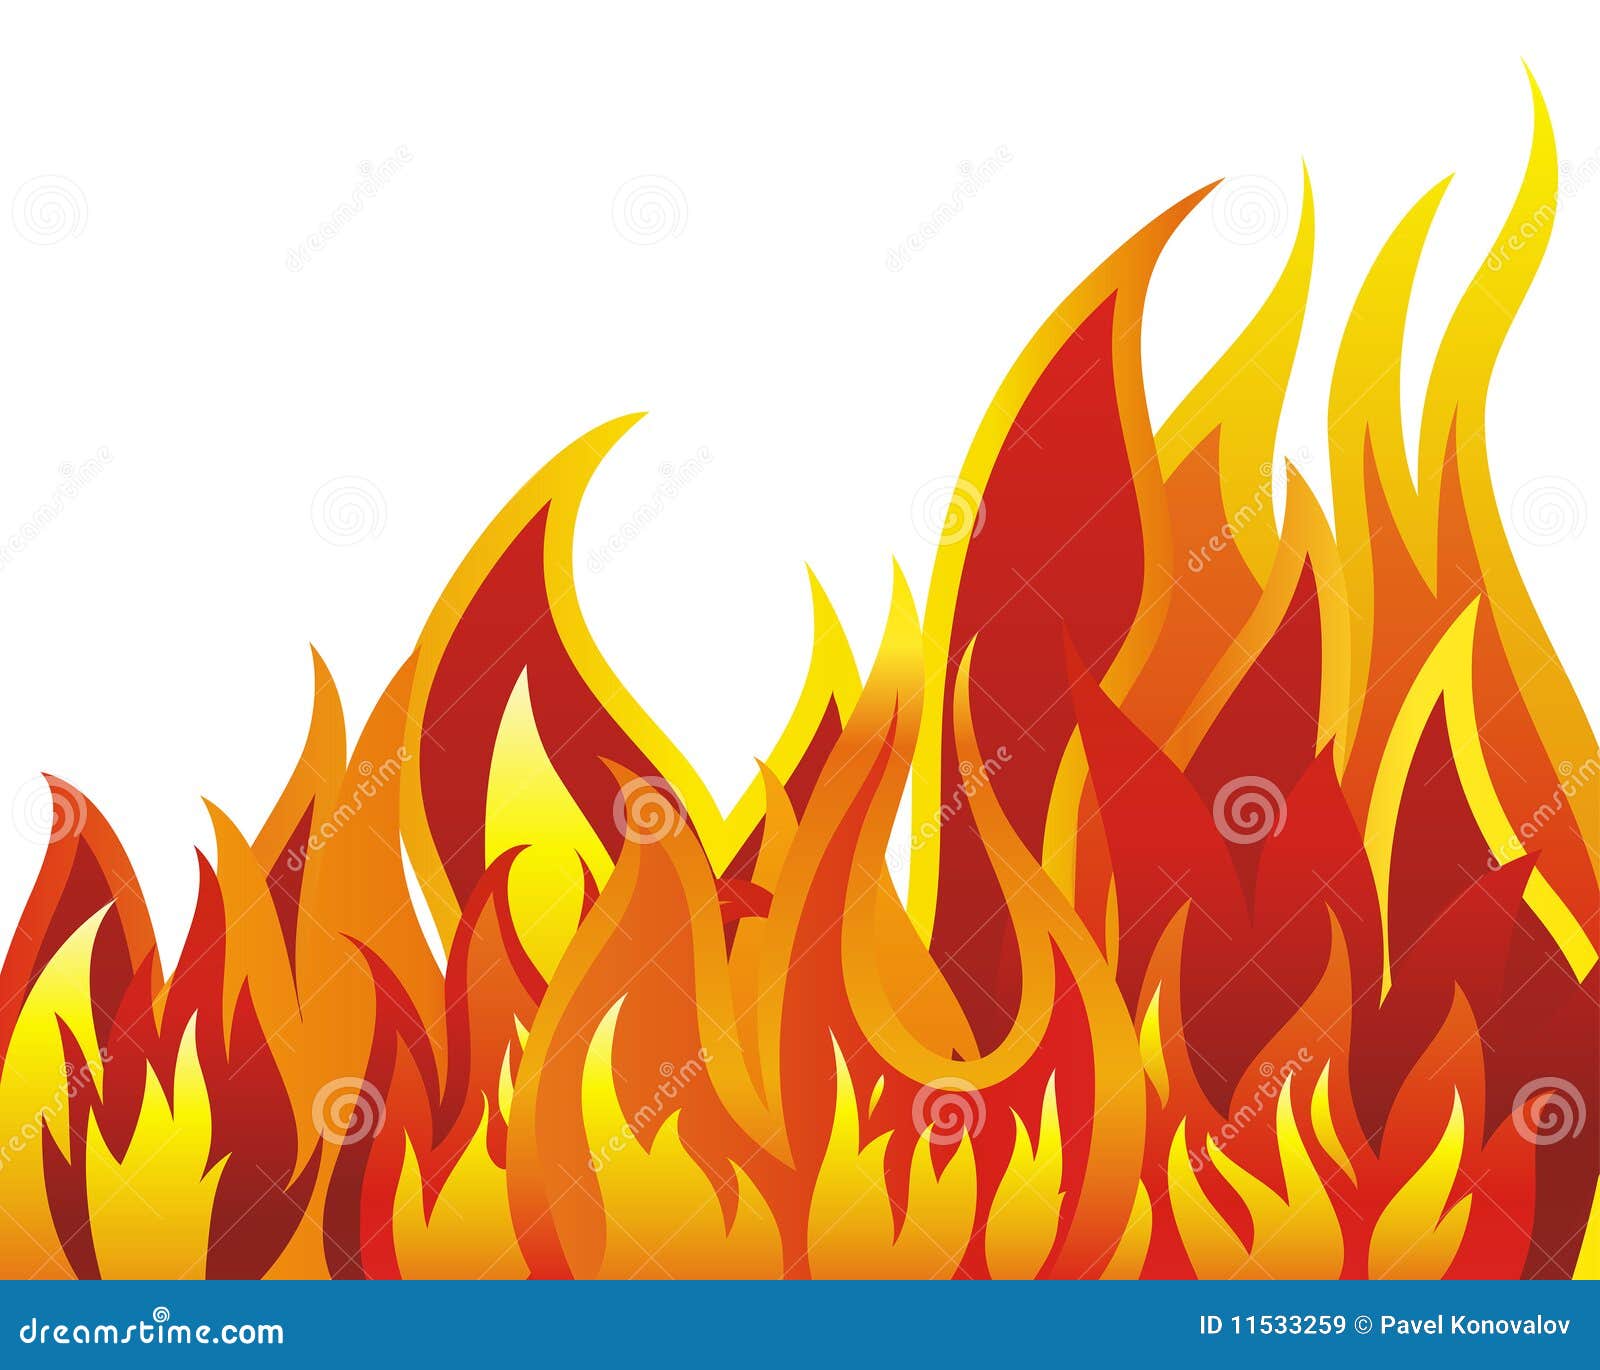 free clipart house on fire - photo #48